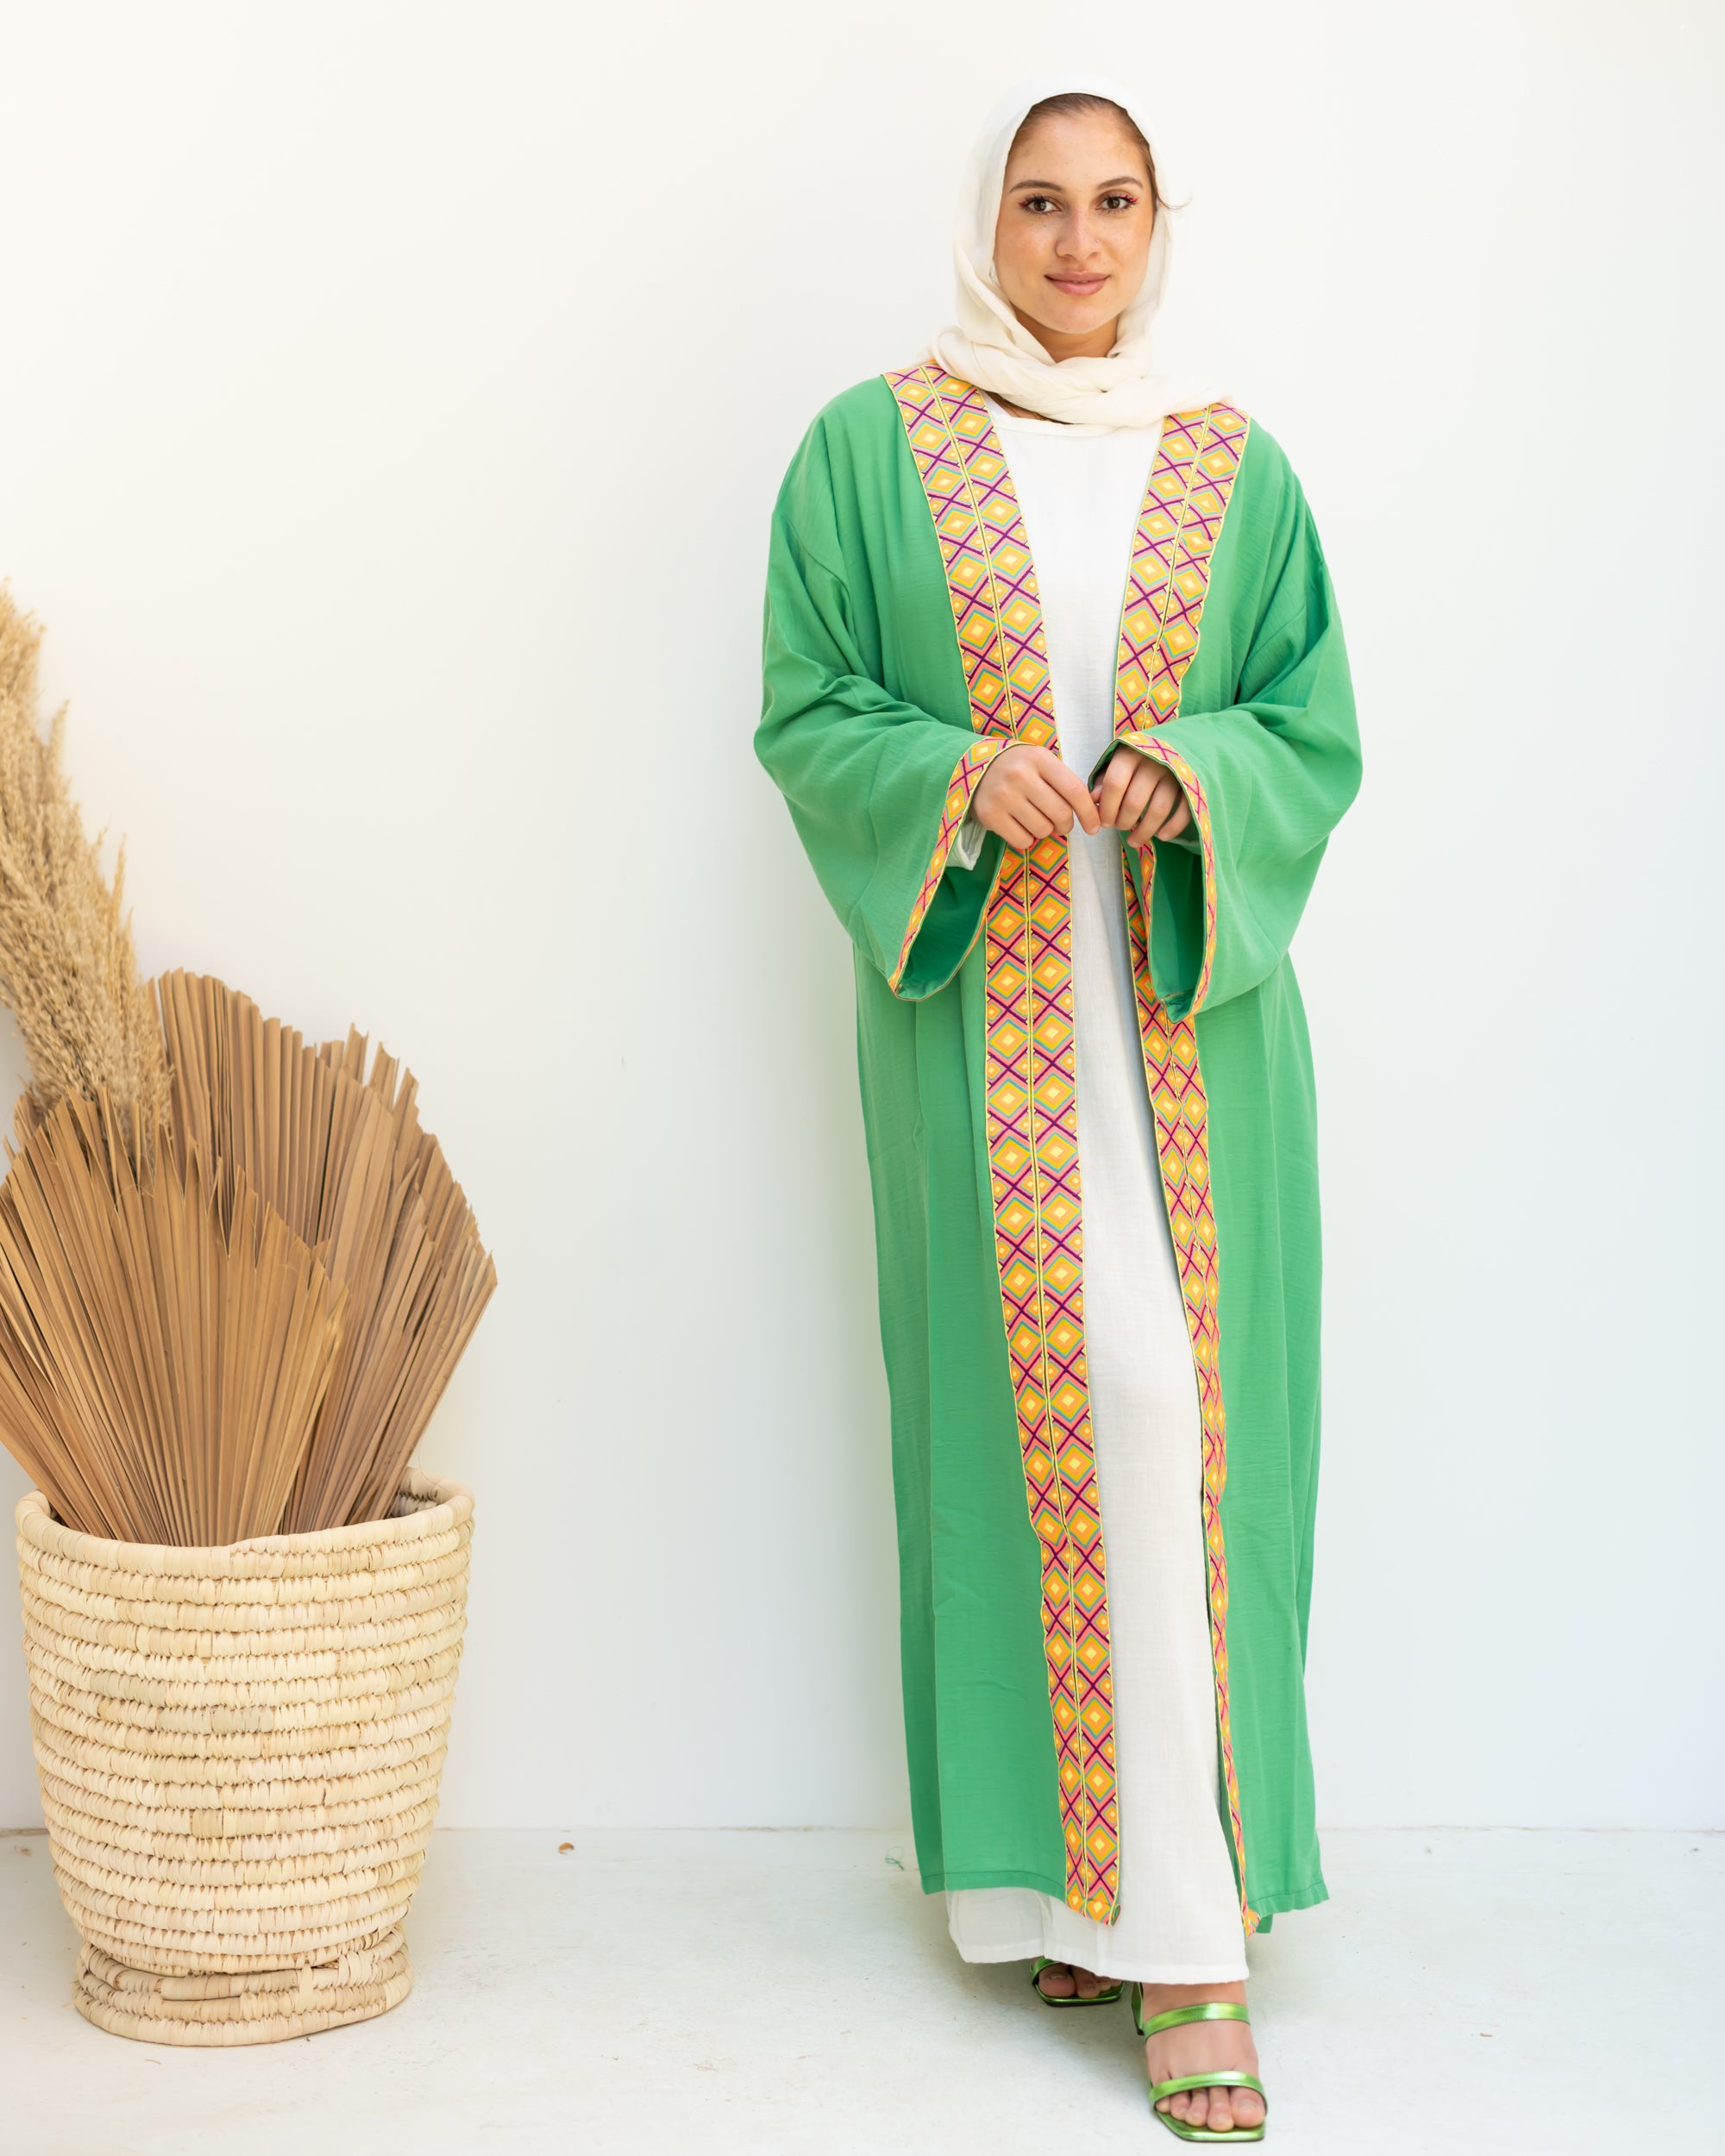 Green cloak with zigzag tape